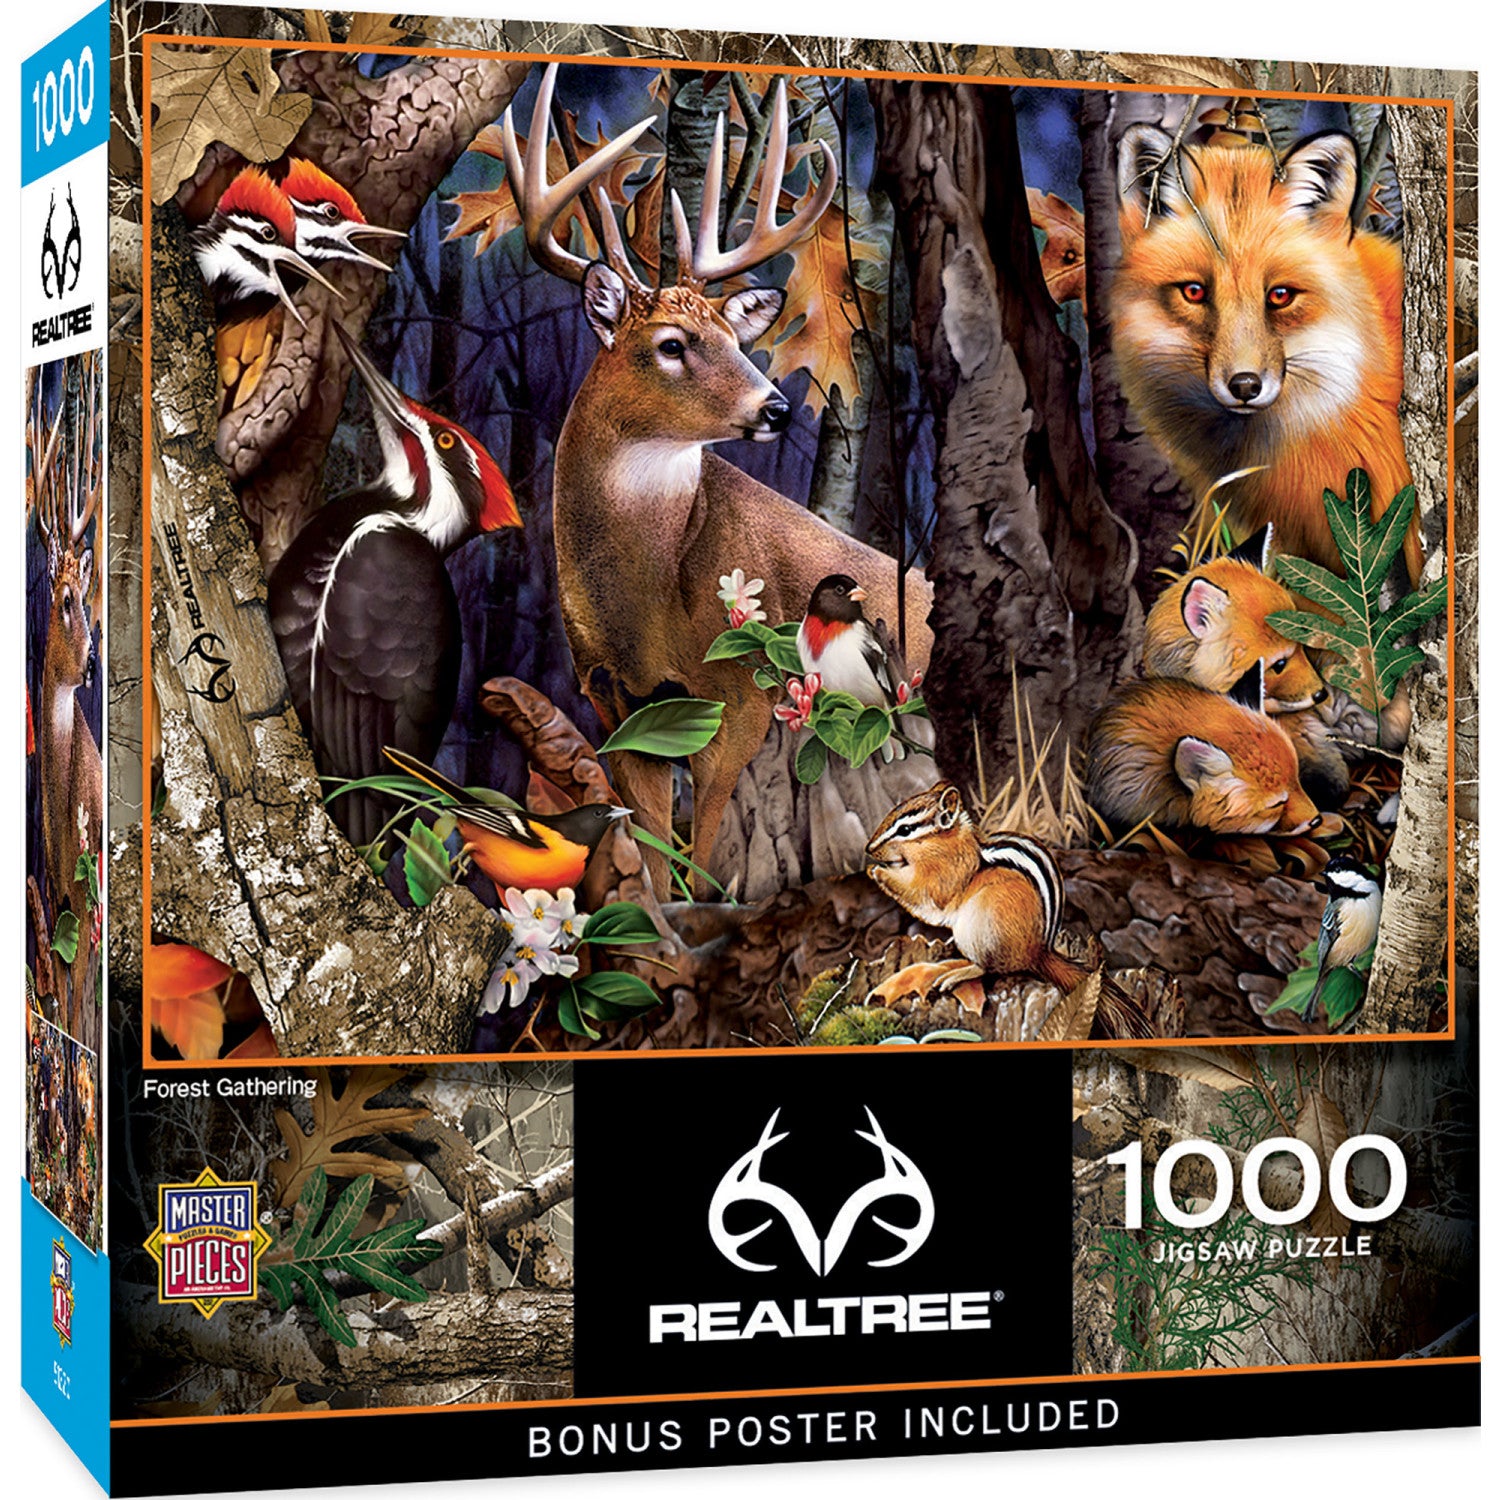 Realtree - Forest Gathering 1000 Piece Jigsaw Puzzle